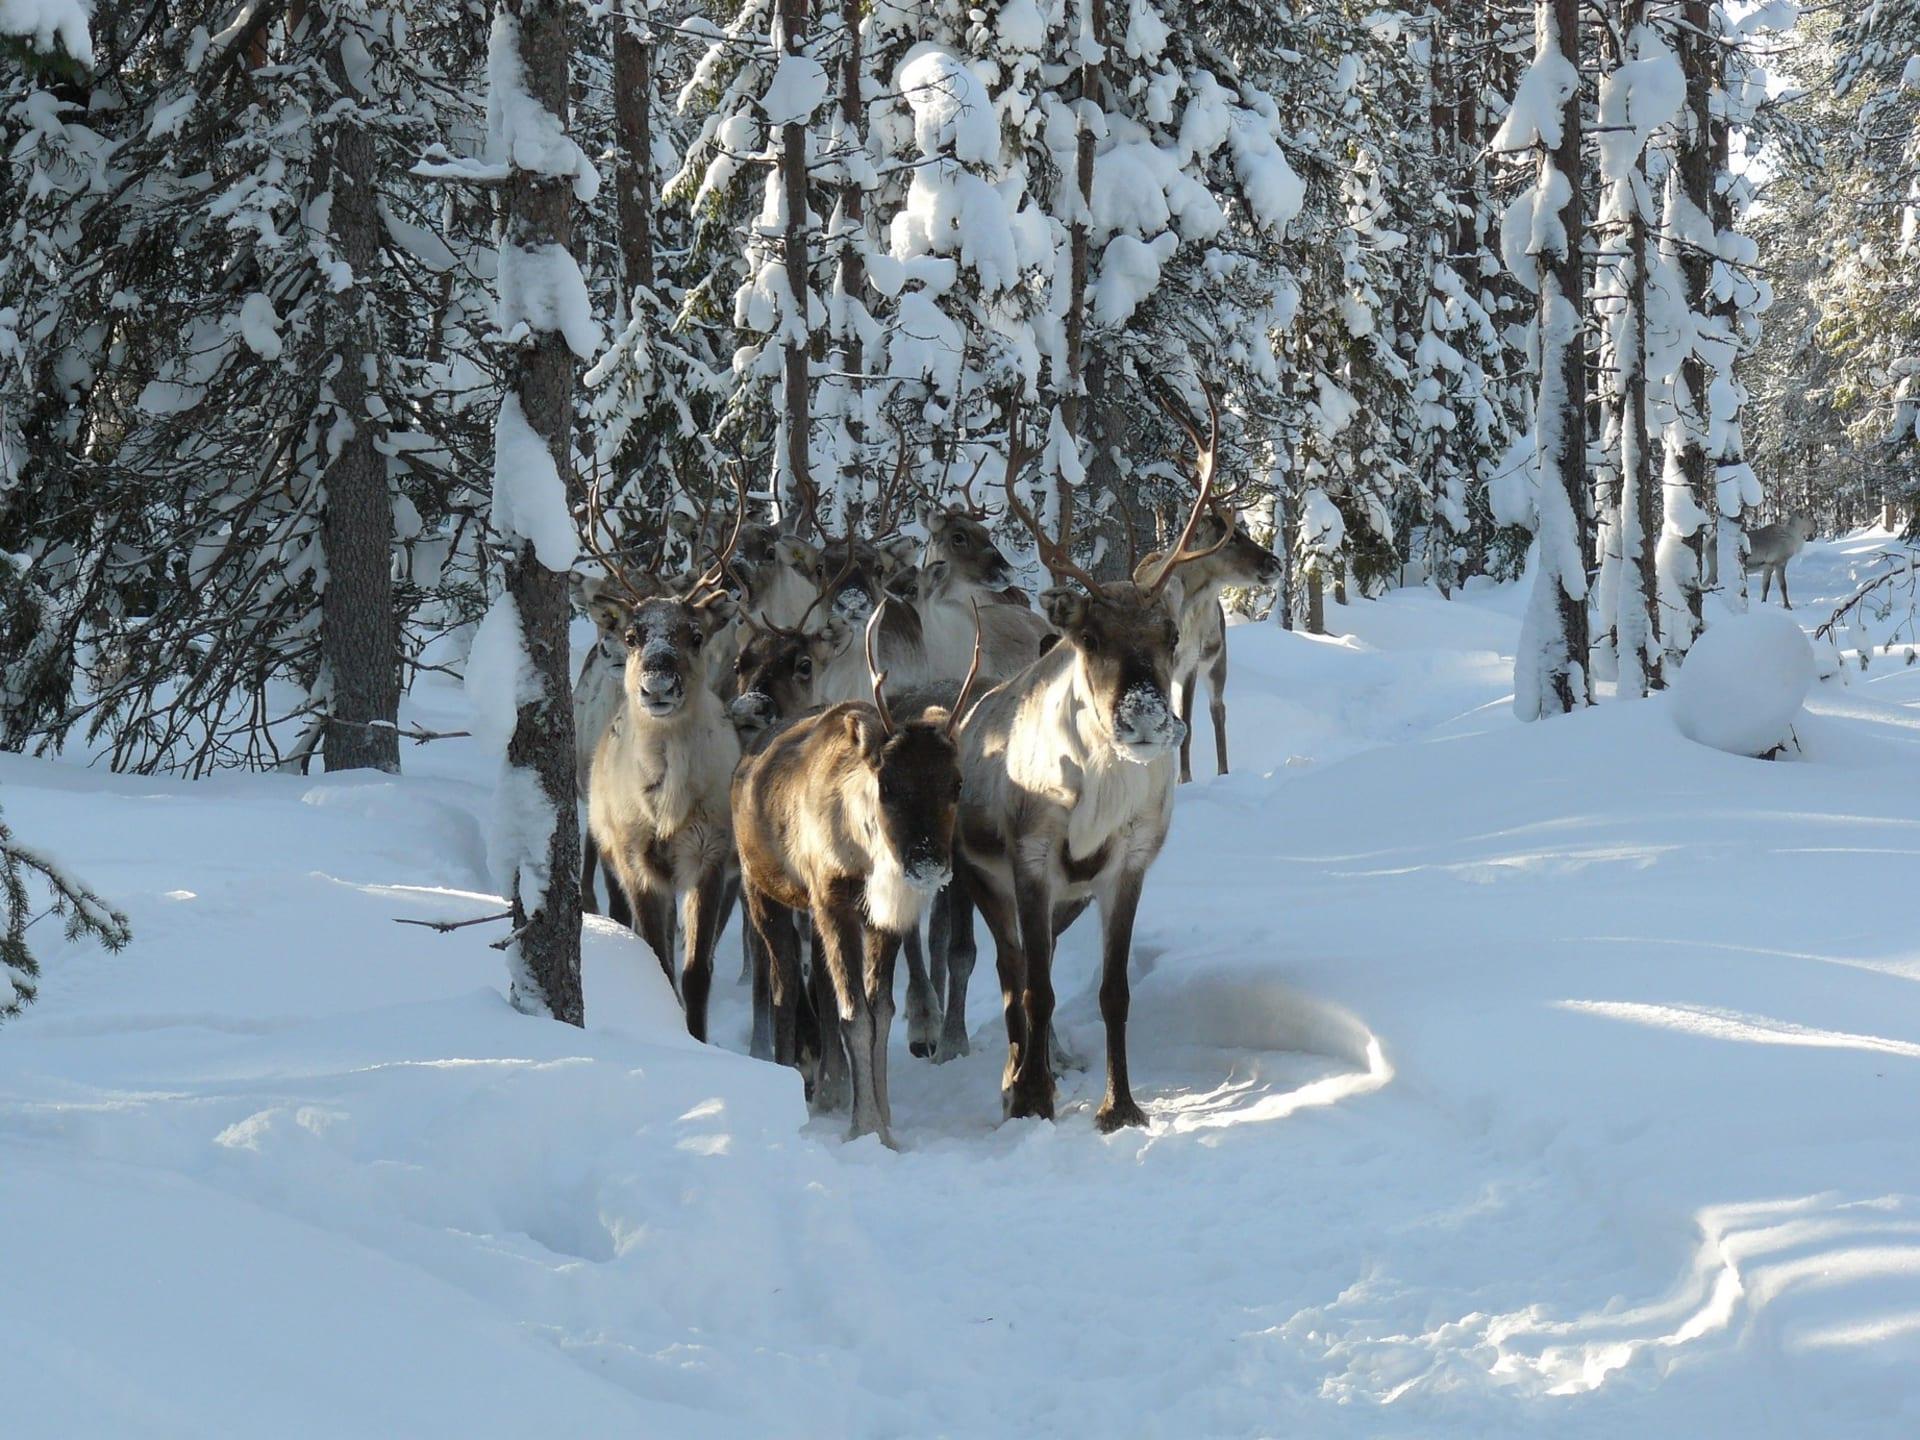 Reindeer in the snowy forest